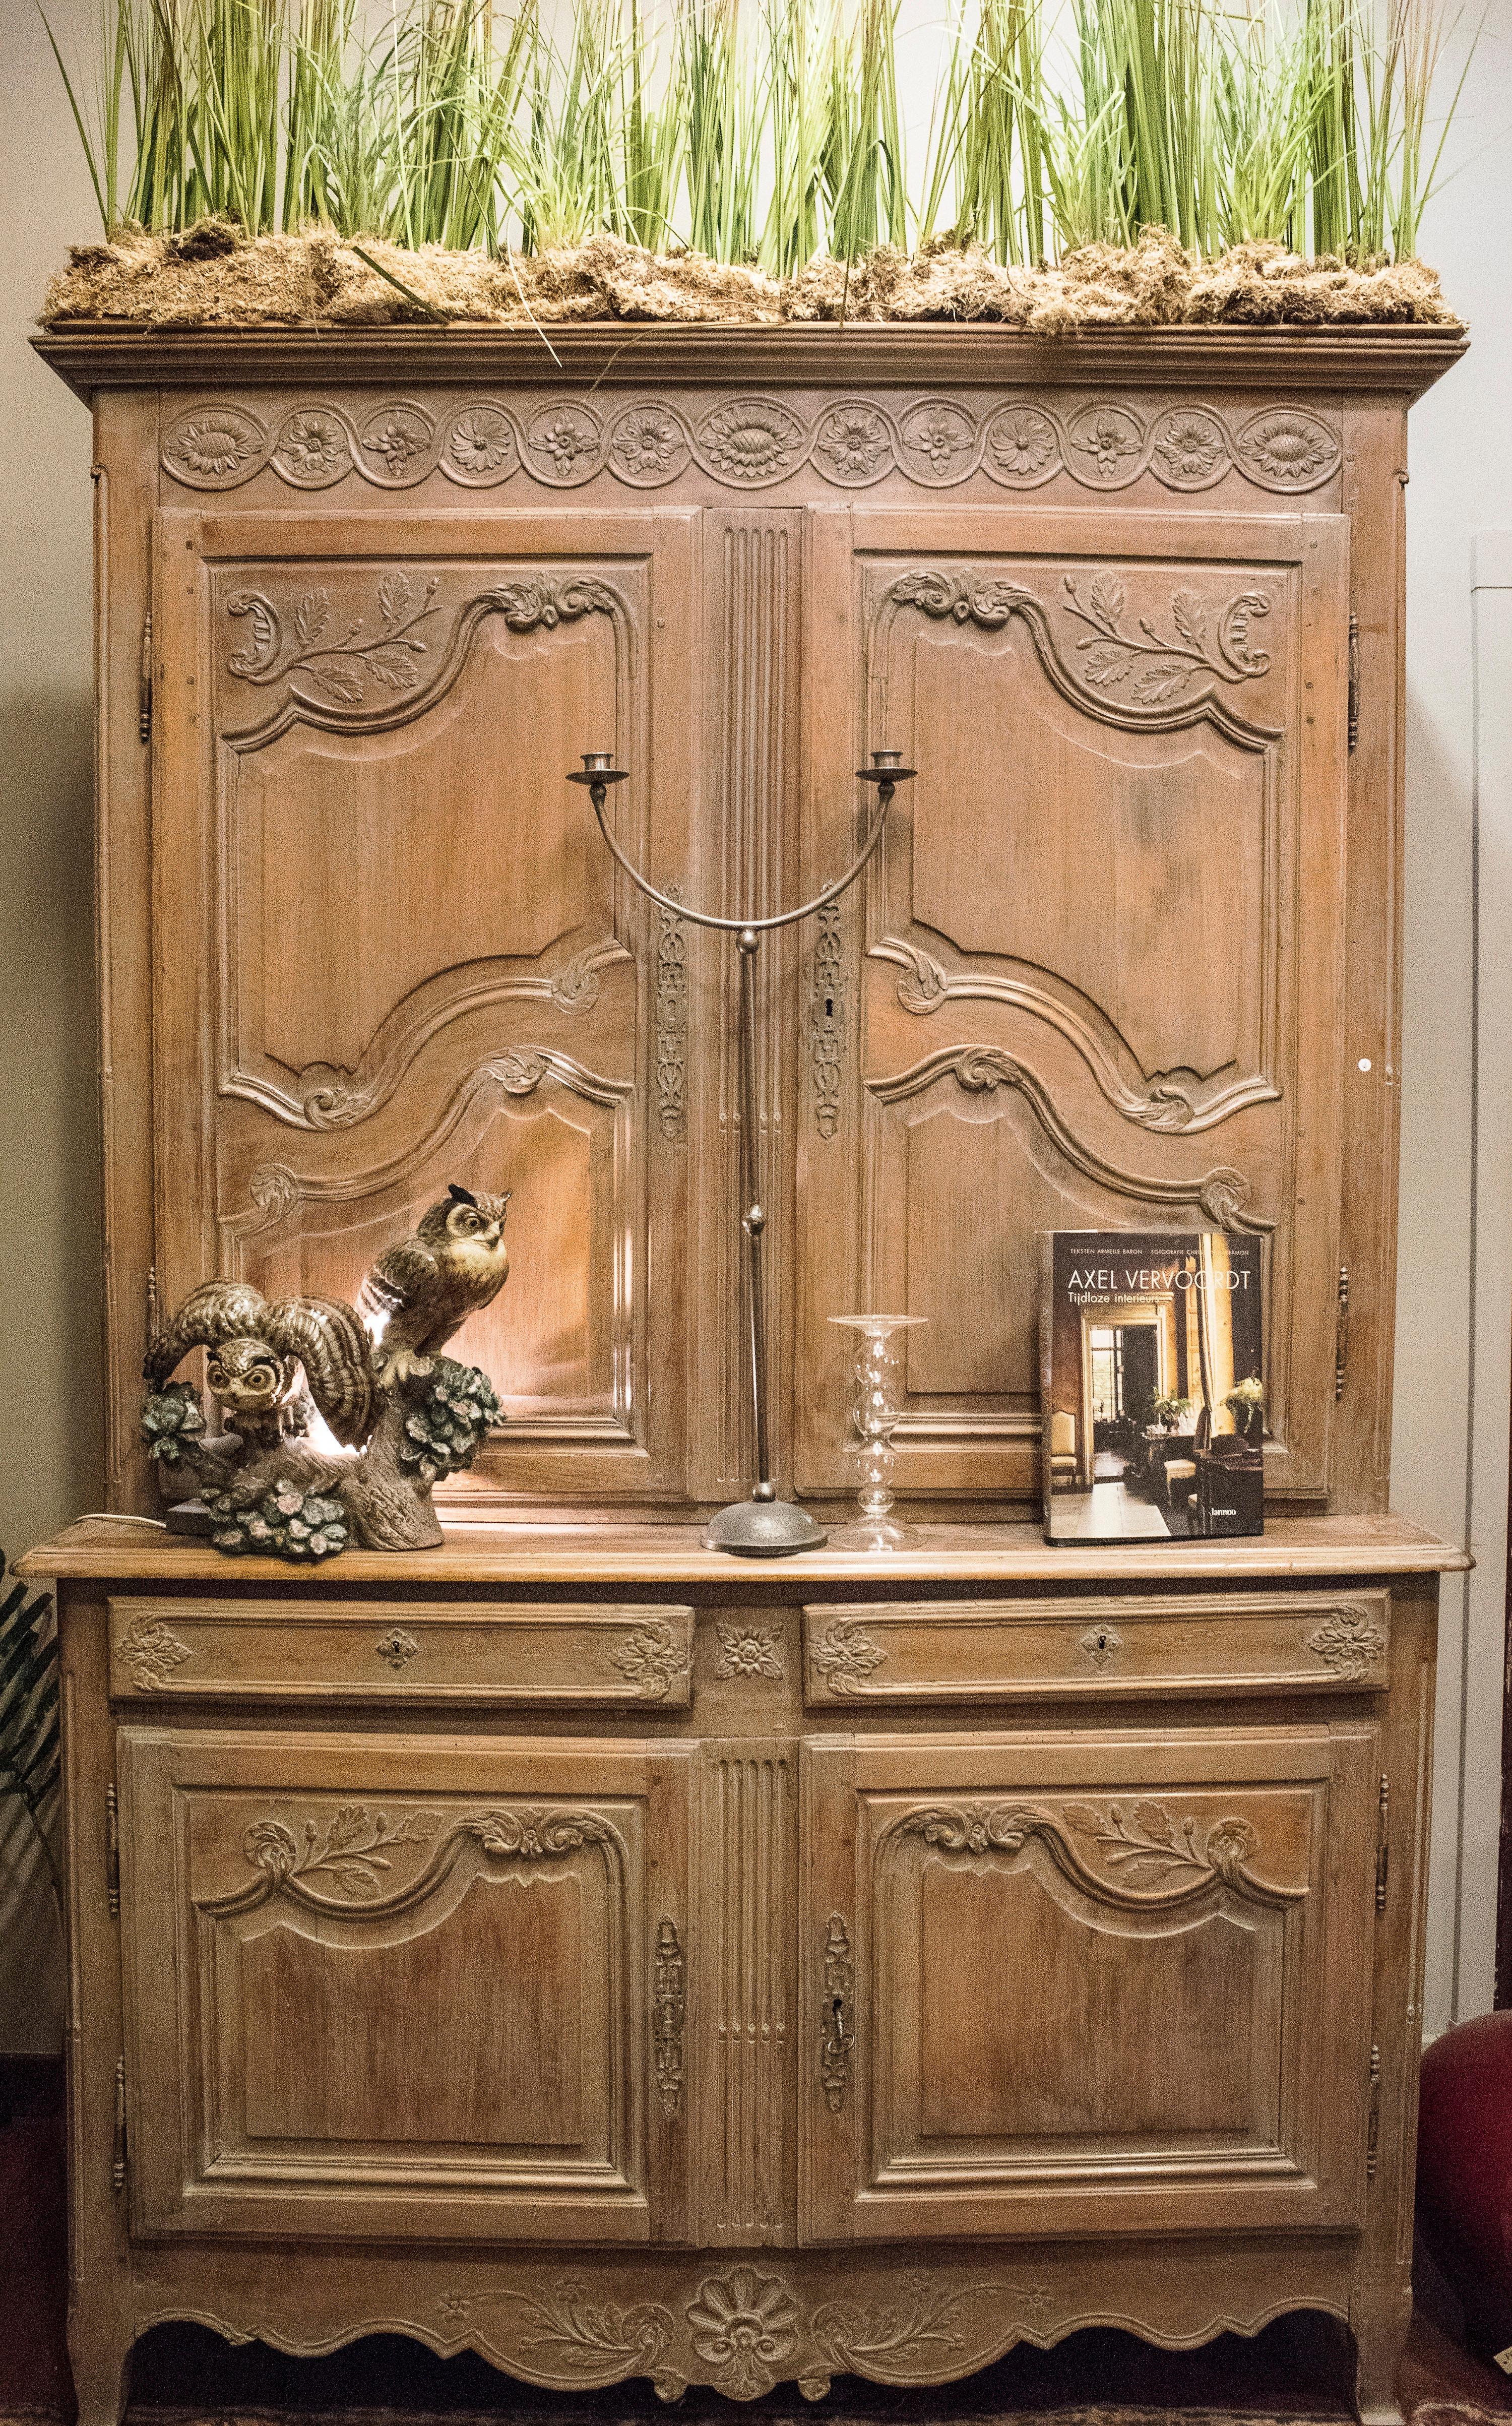 Stunning Provenzal cupboard in carved and stucco fruit wood , early 19th century , circa 1800 .
With 2 drawers in the middle, doors up and down .Wood carved with floral motifs and branches of acorns. Friso with floral garland.
It comes from a very